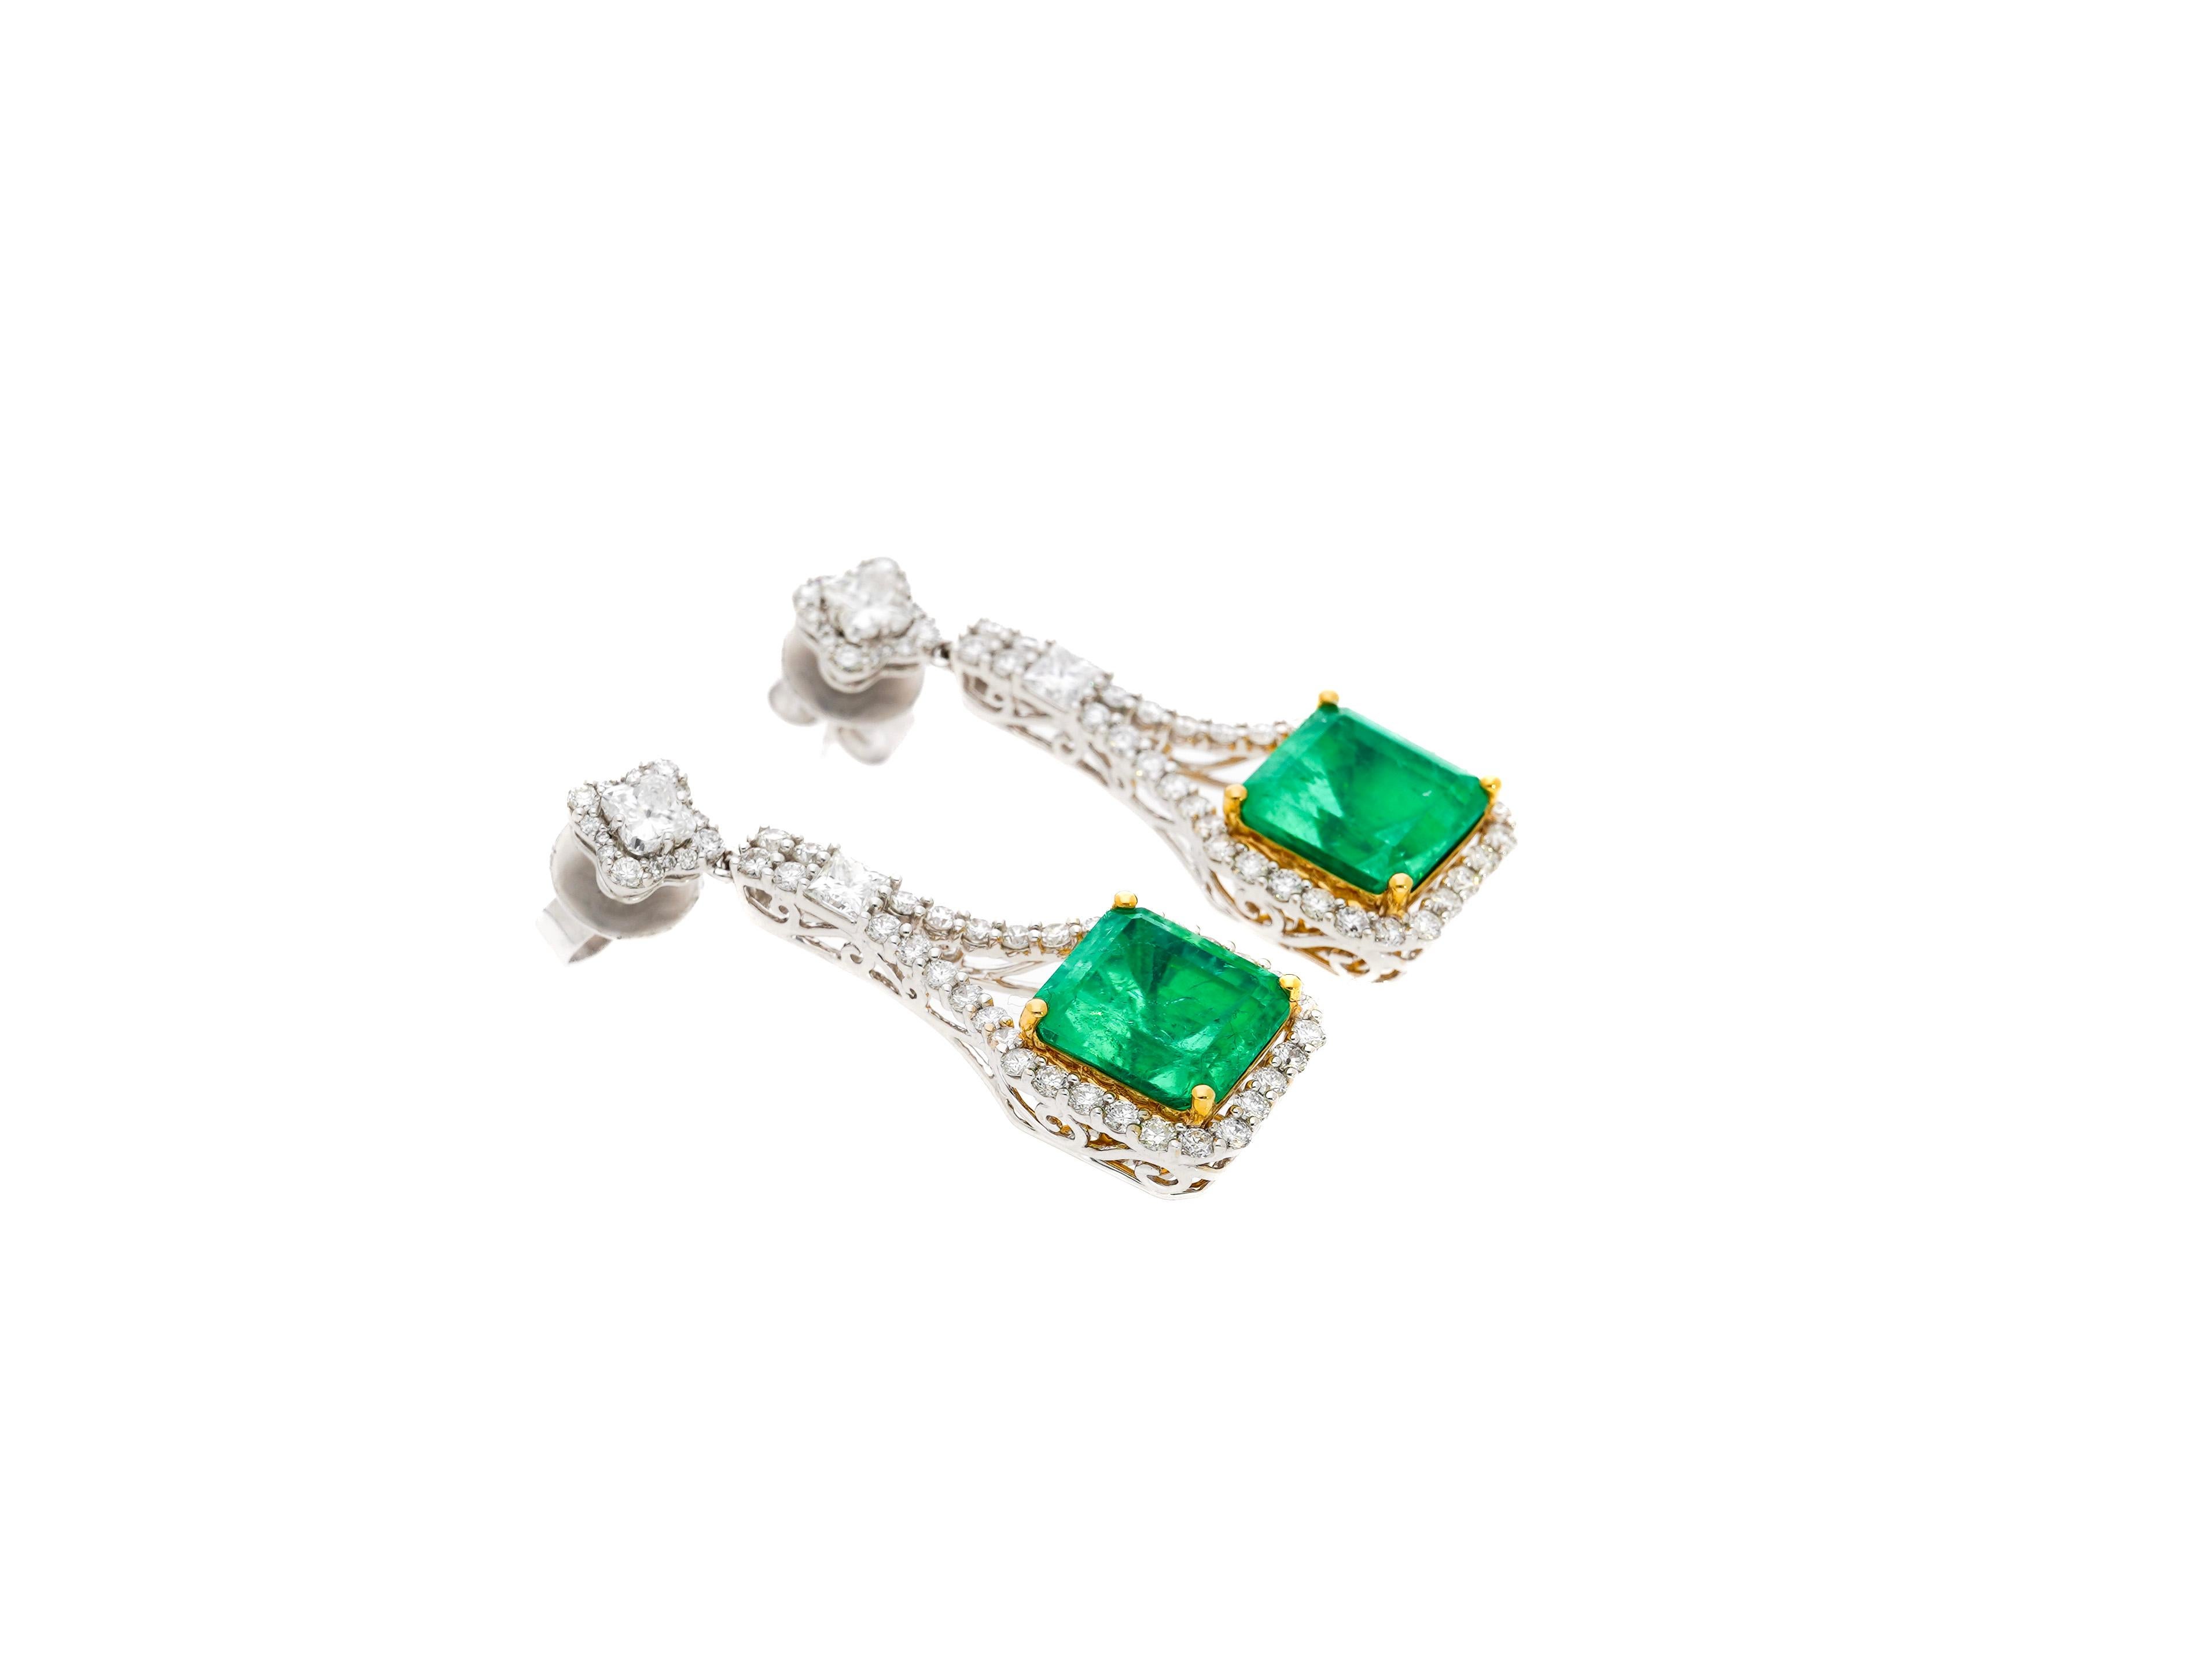 GRS Certified perfect matching pair of minor oil pastel green Colombian emeralds and diamond drop earrings. 

Details: 
✔ Item Type: Dangle Earrings 
✔ Metal: 18k white & yellow gold
✔ Weight: 11.84 grams
✔ Setting: Prong, Halo 
✔ Closure: